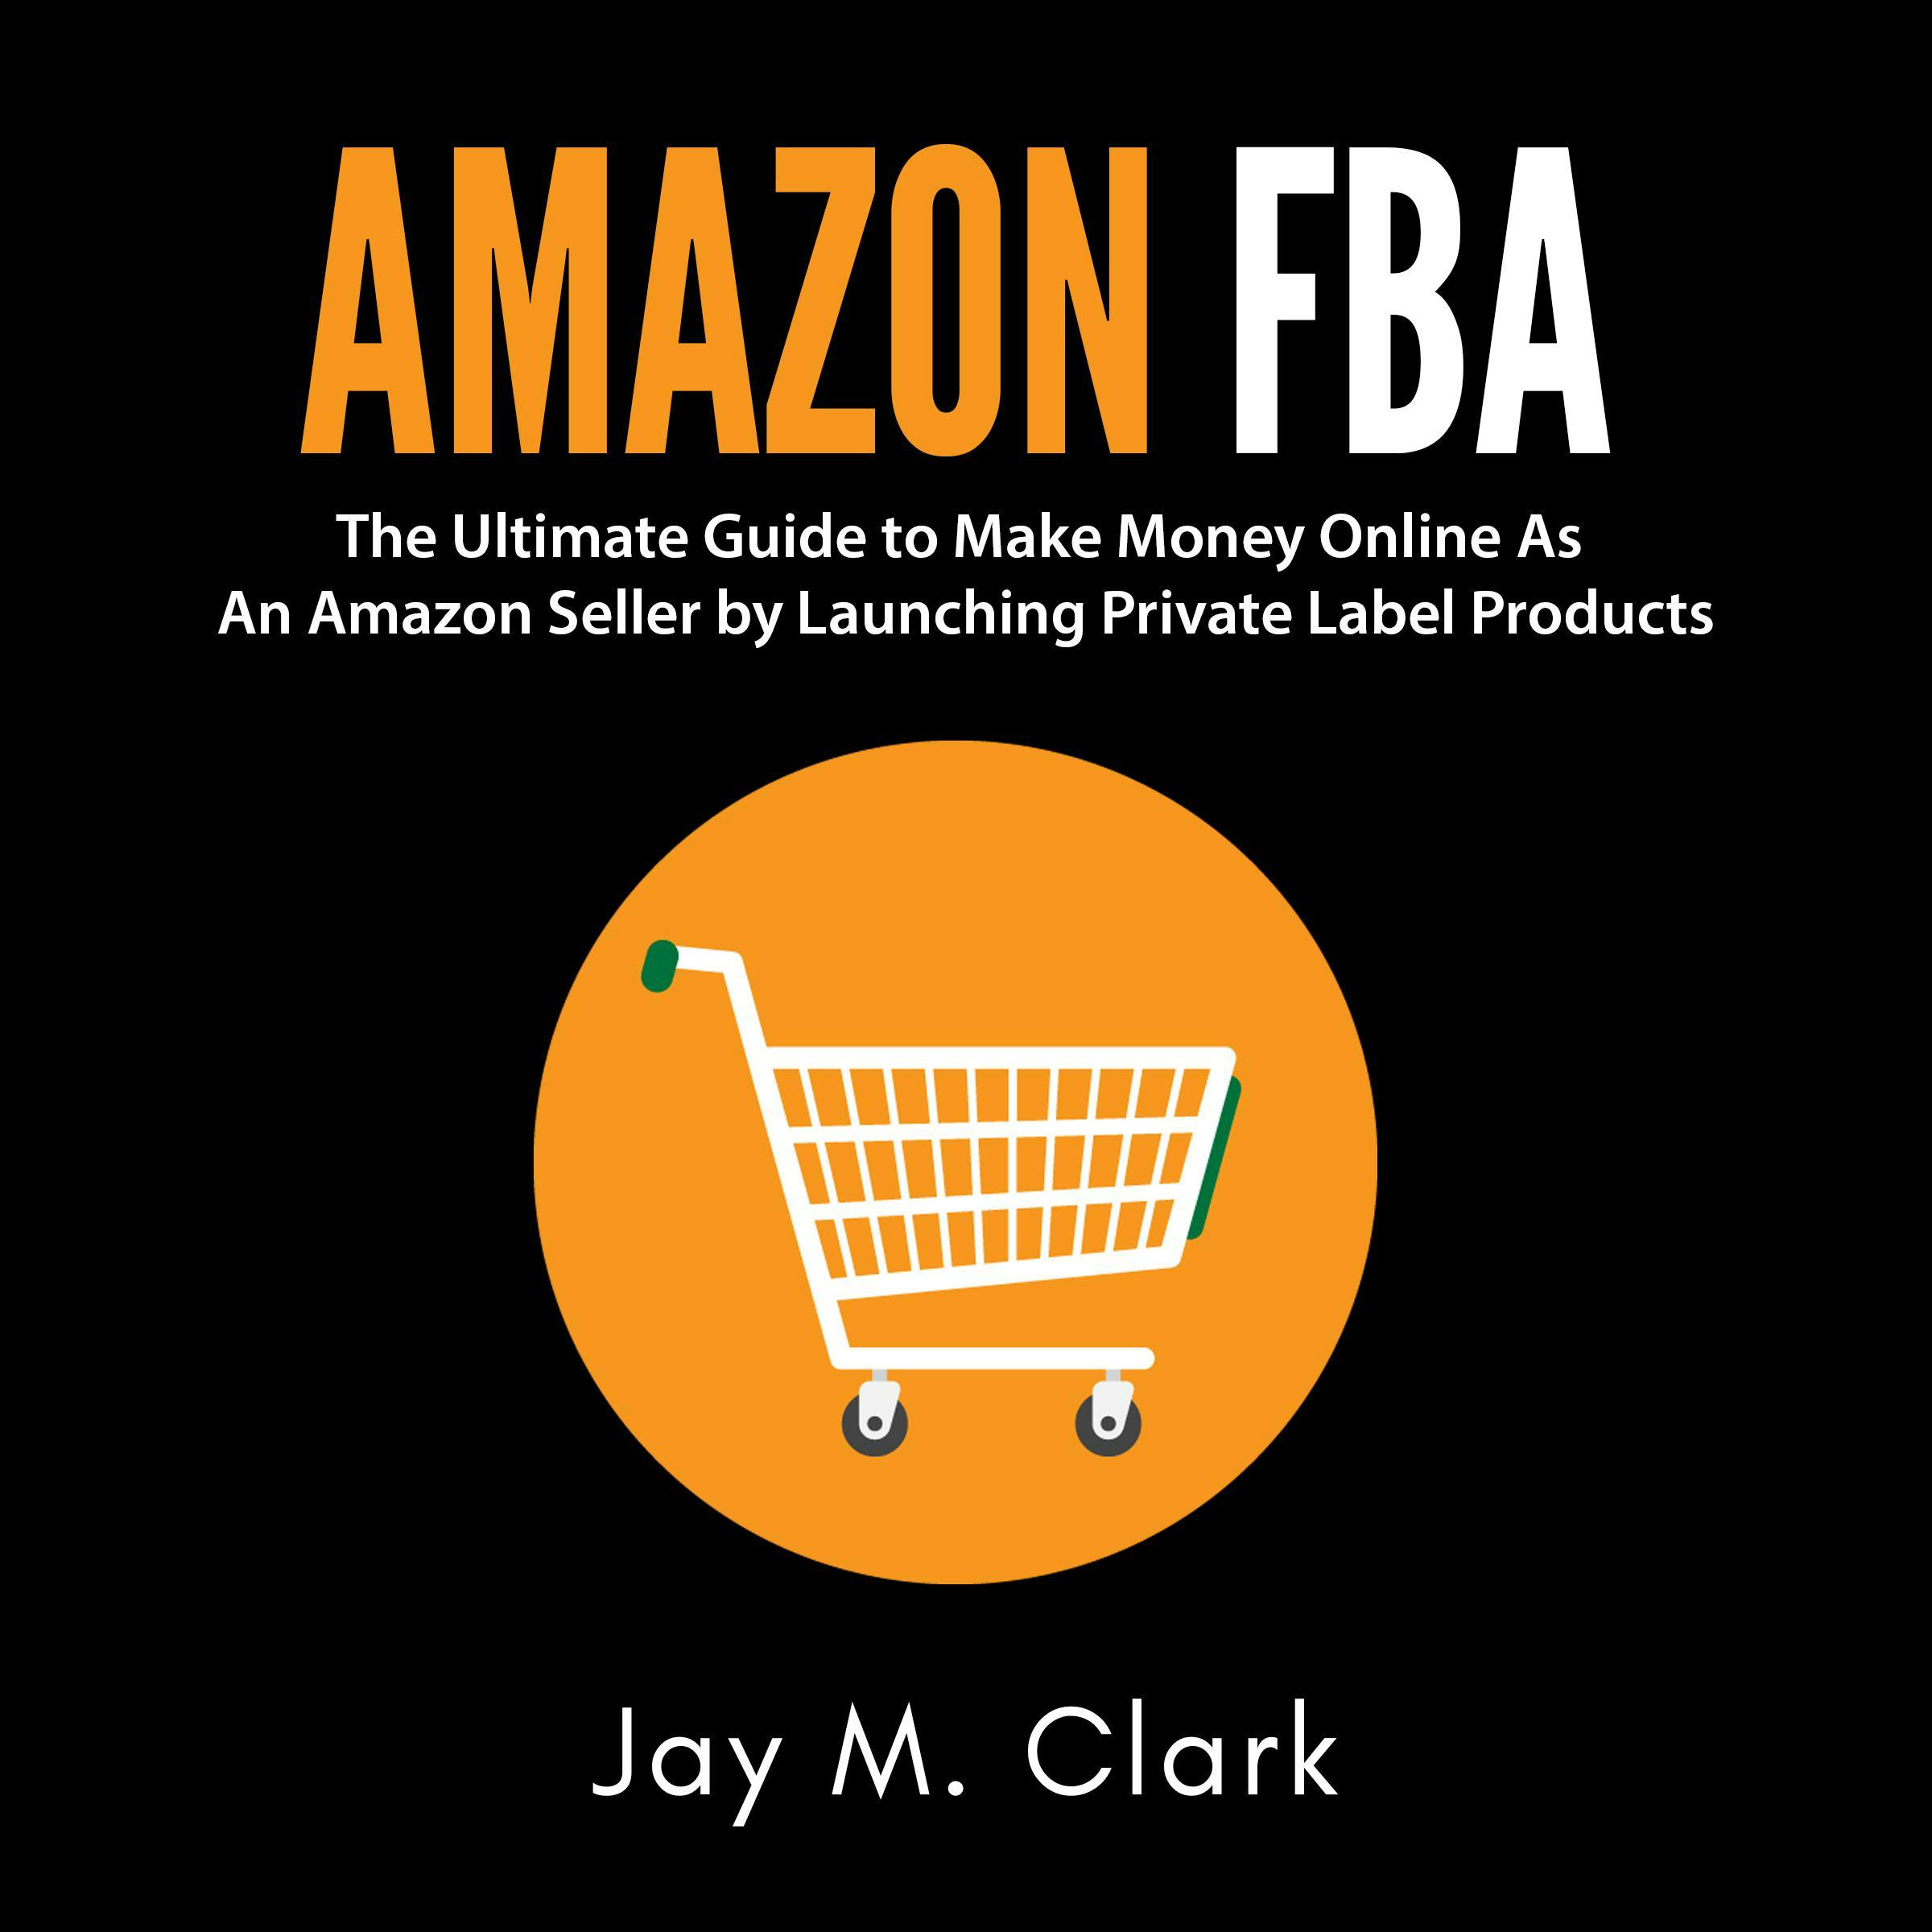 Amazon Fba: The Ultimate Guide to Make Money Online as an Amazon Seller by Launching Private Label Products - undefined